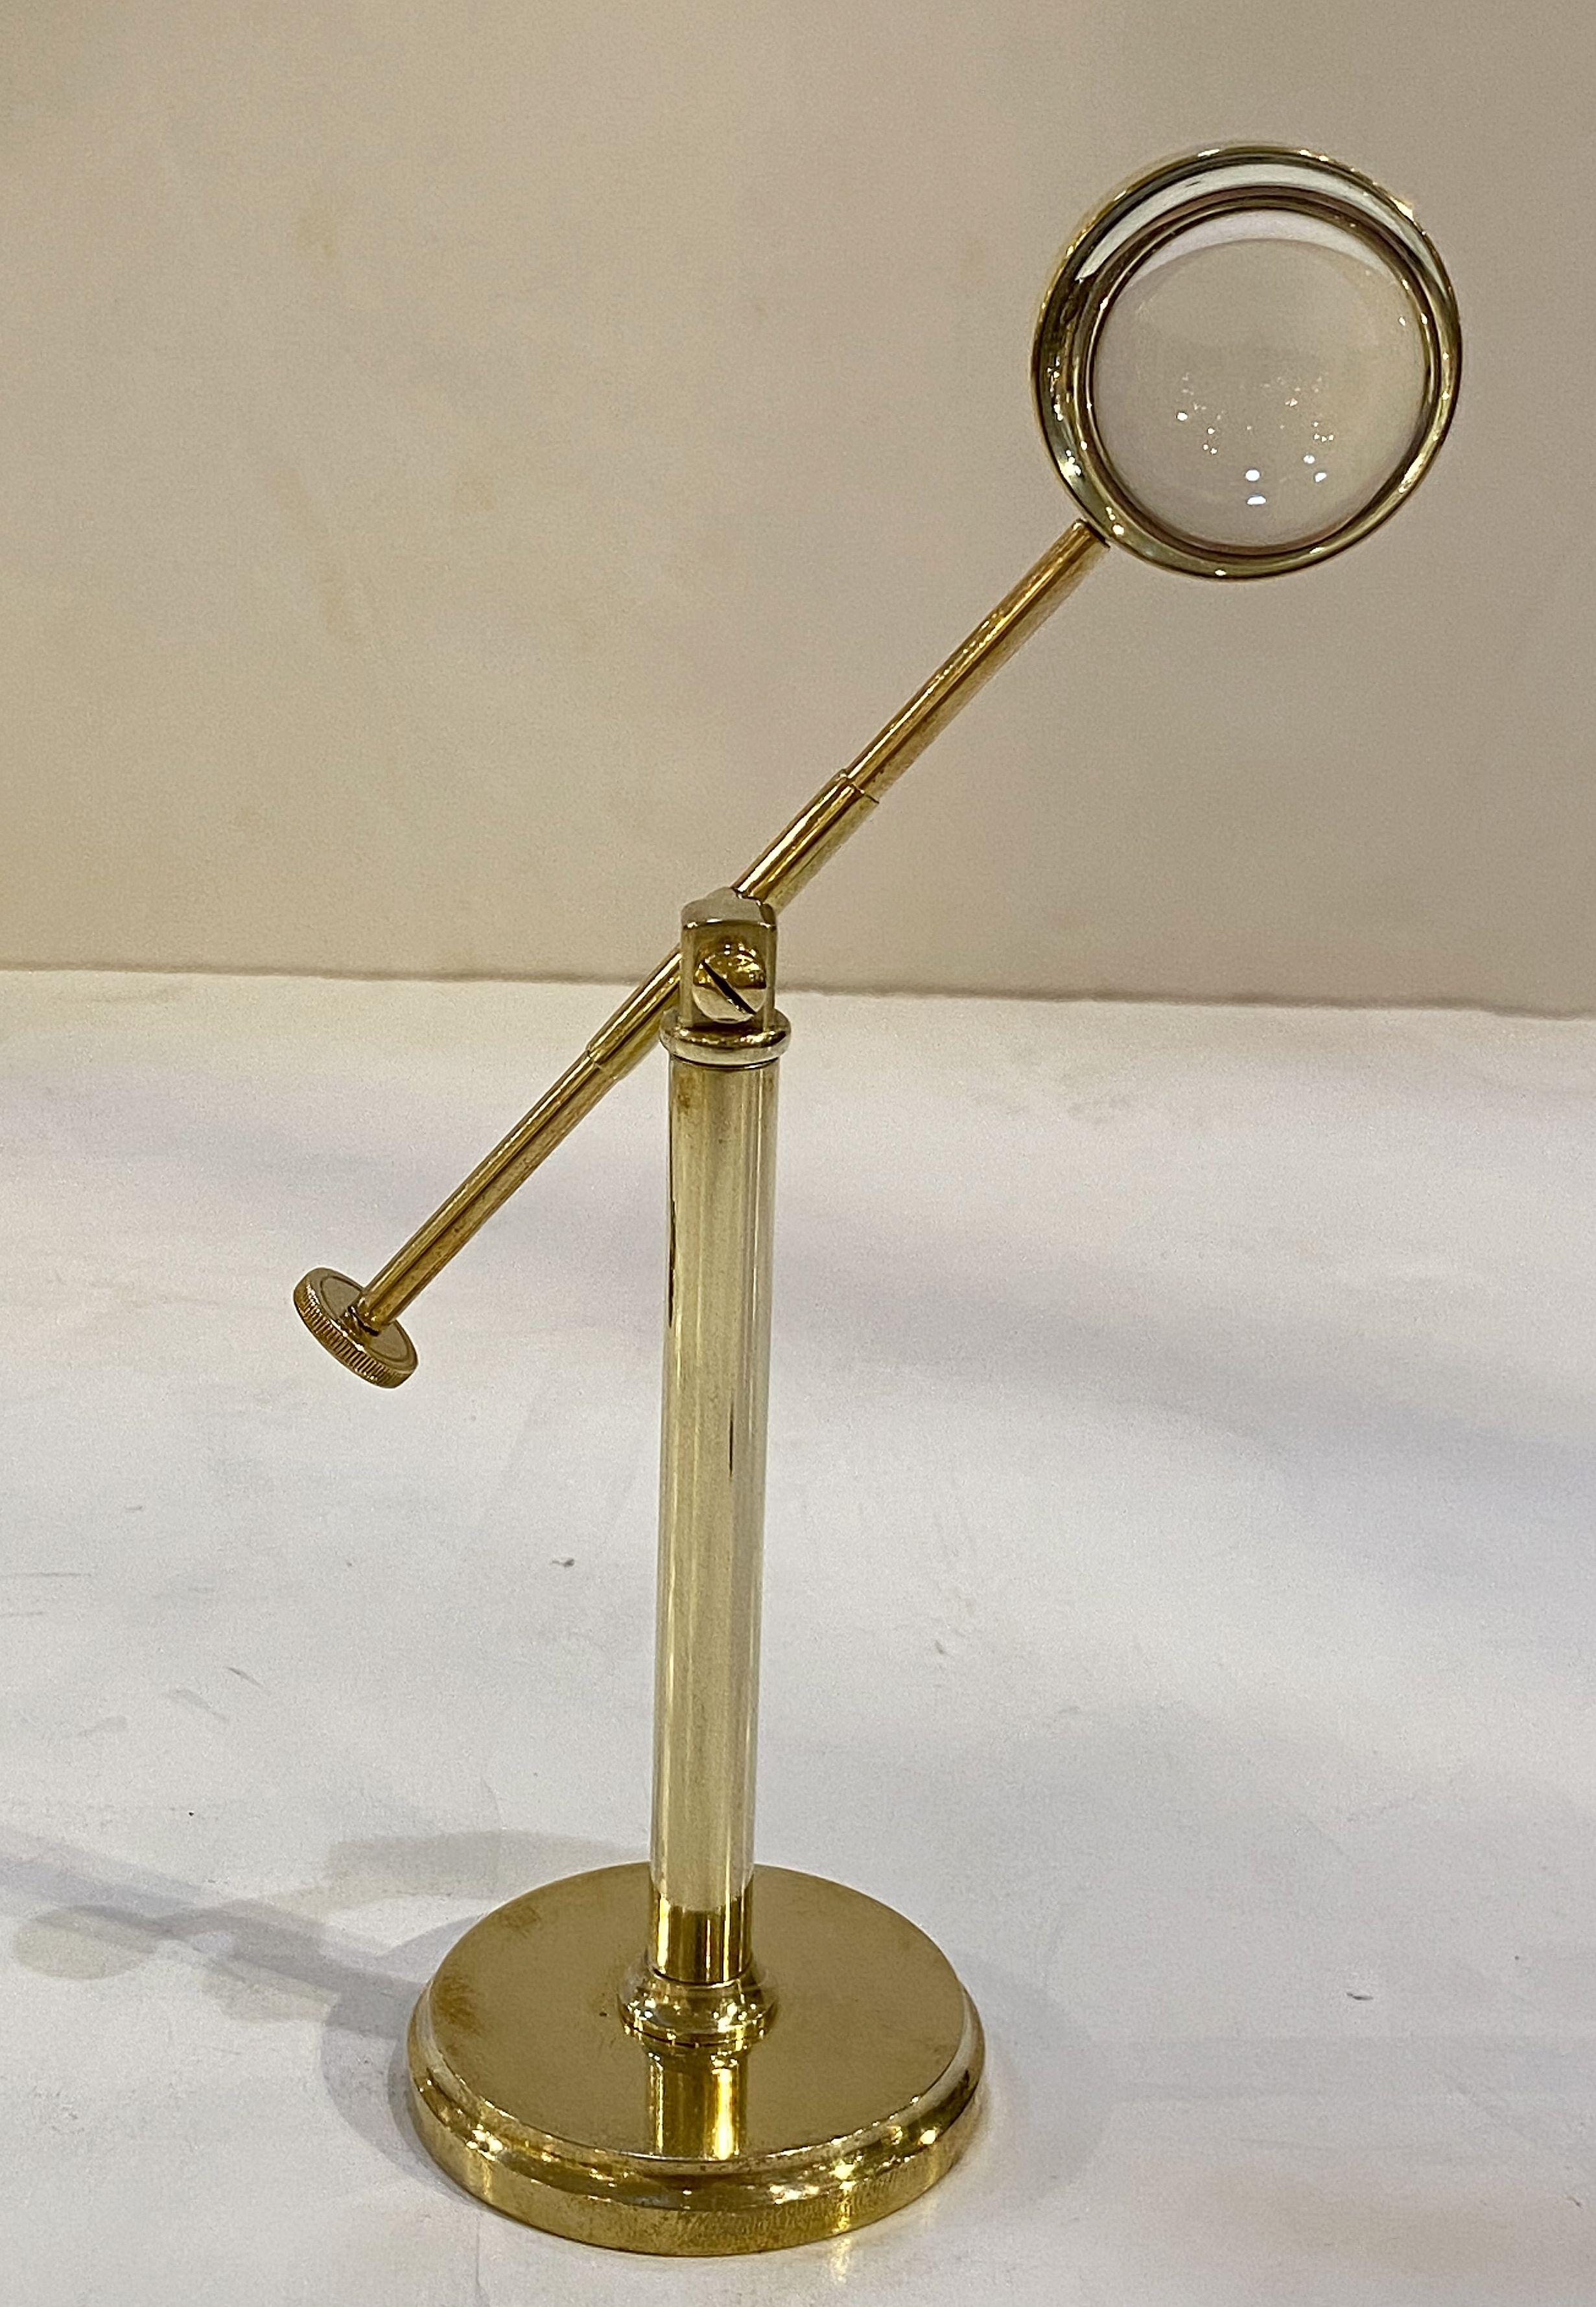 A fine English desktop or tabletop magnifier of brass in the Classic industrial style, featuring a magnifier on an adjustable stand which allows movement up and down, side to side, and rotational.

Stand H is approximately 5 1/2 inches with